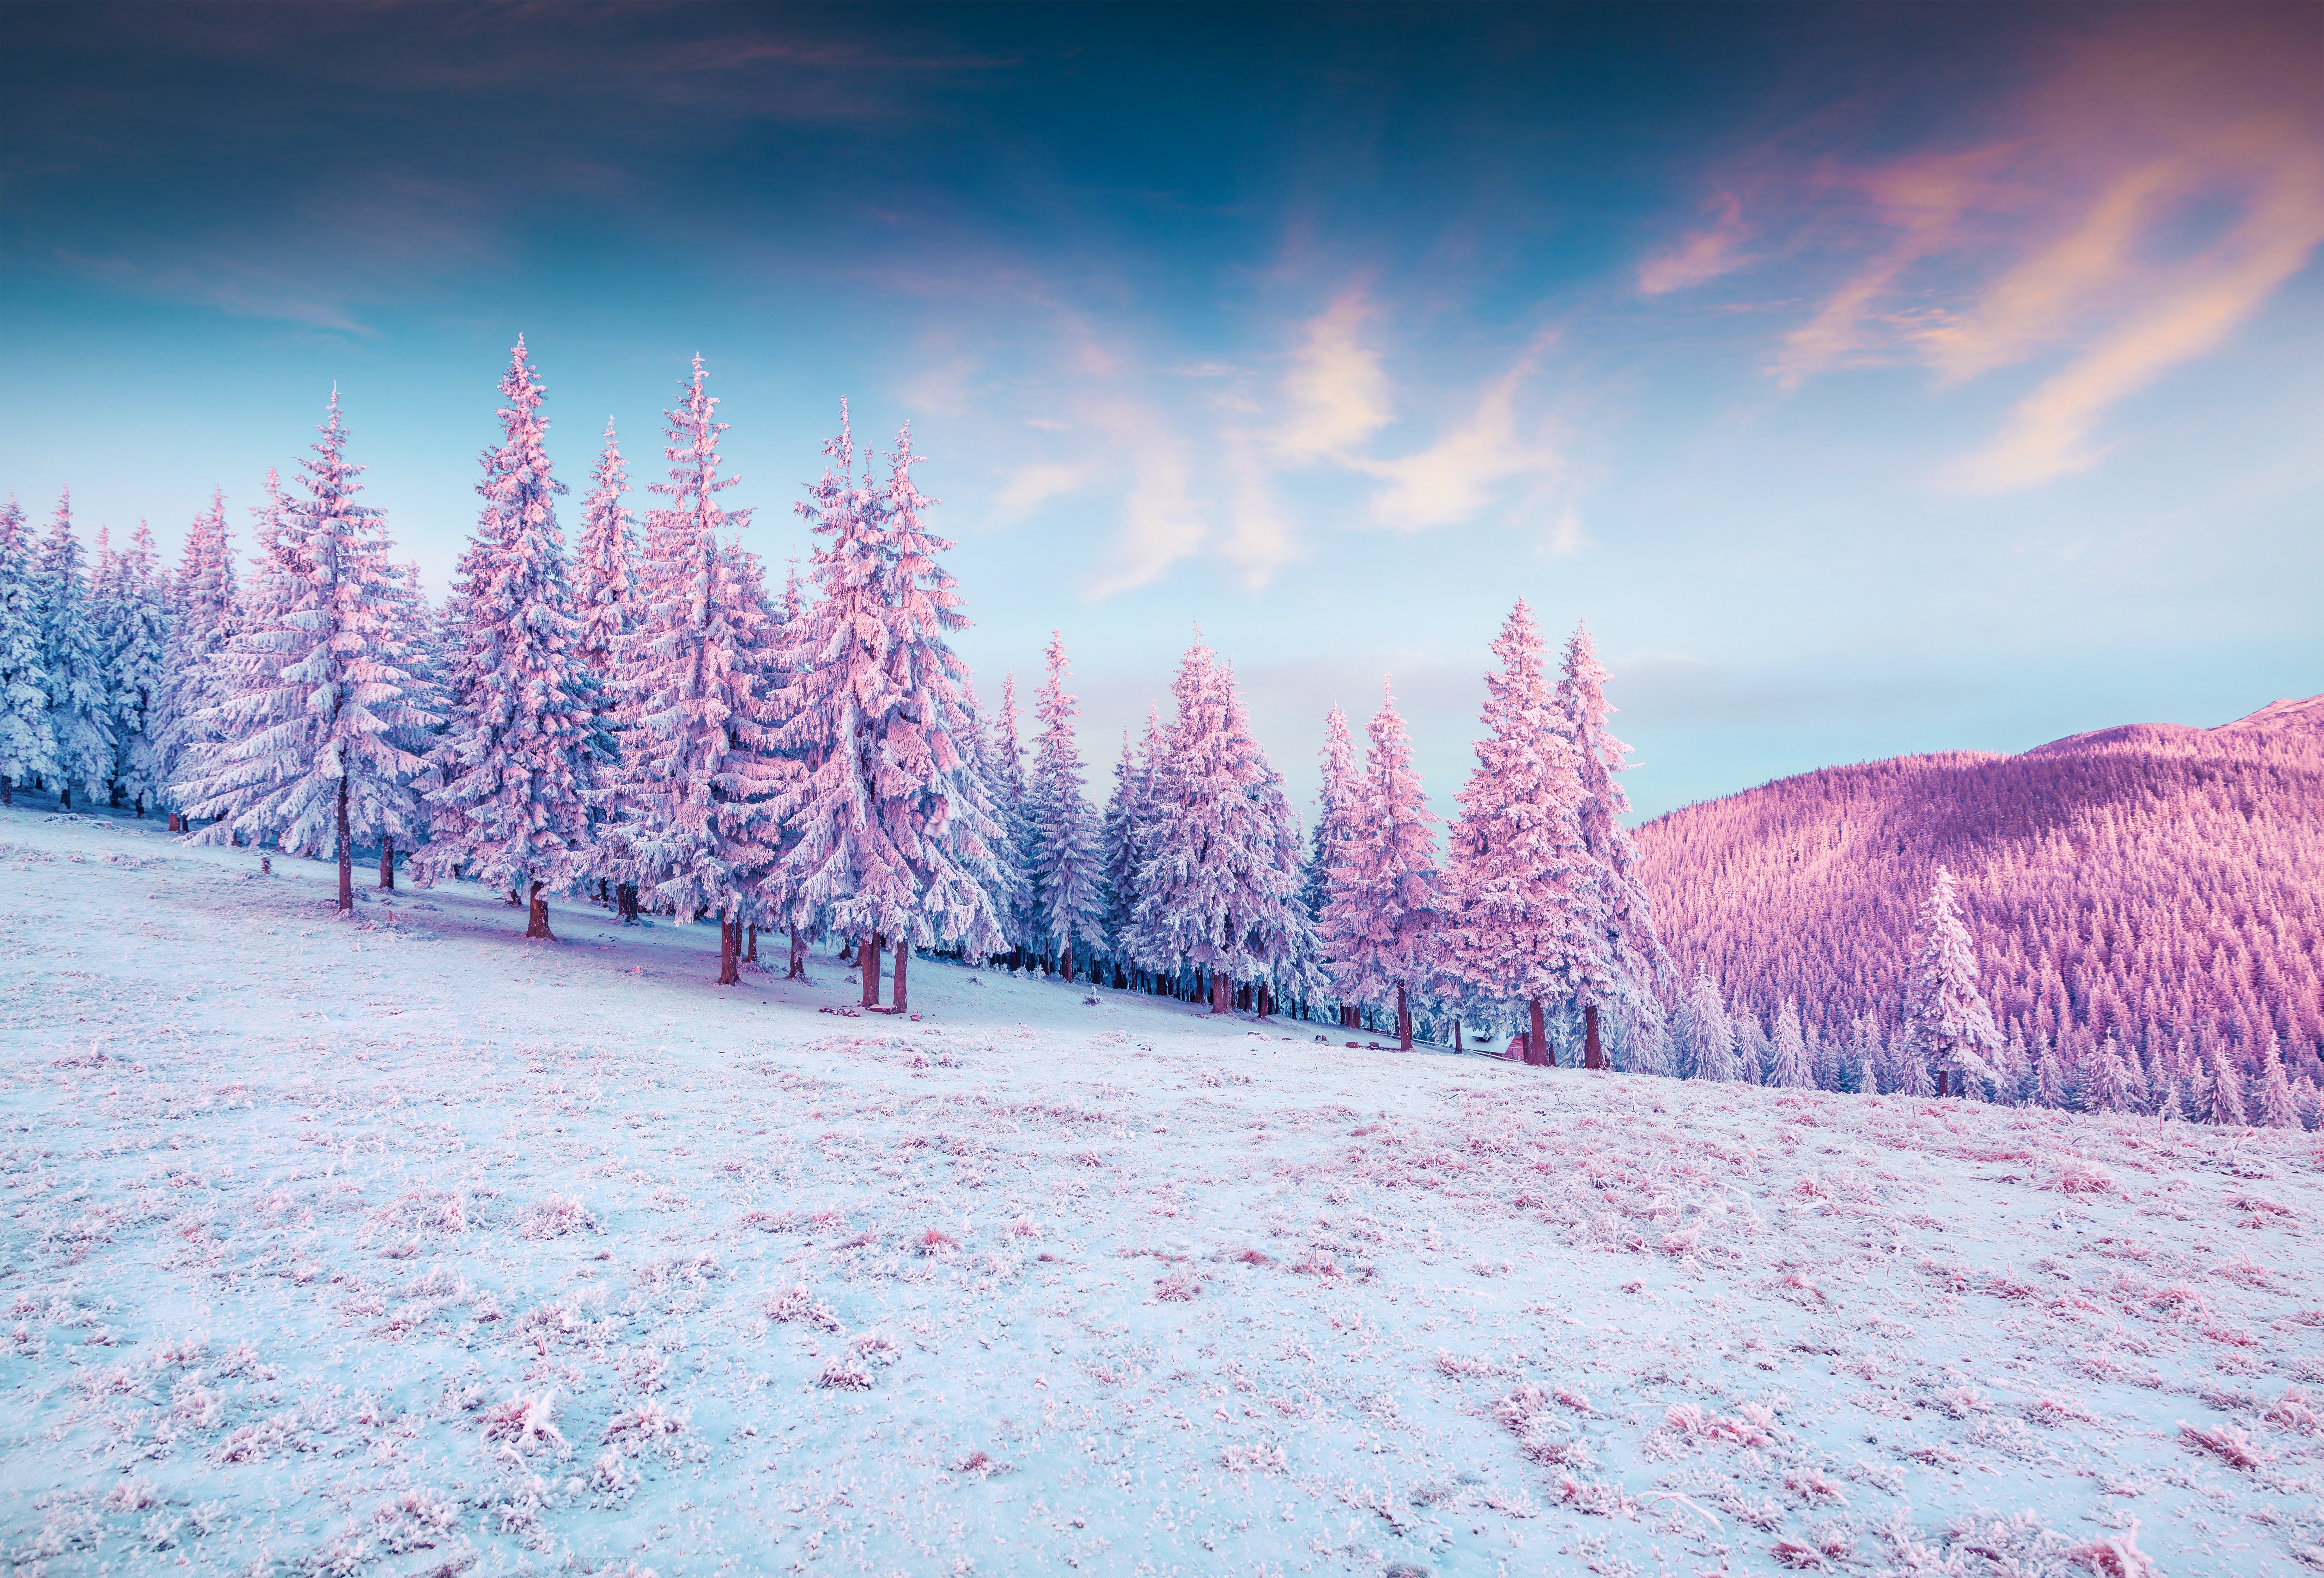 Winter Fir Nature Landscape Hills Mountains Snow Sky Forest Trees Pink White Cold Colorful Clouds Su 5891x4000